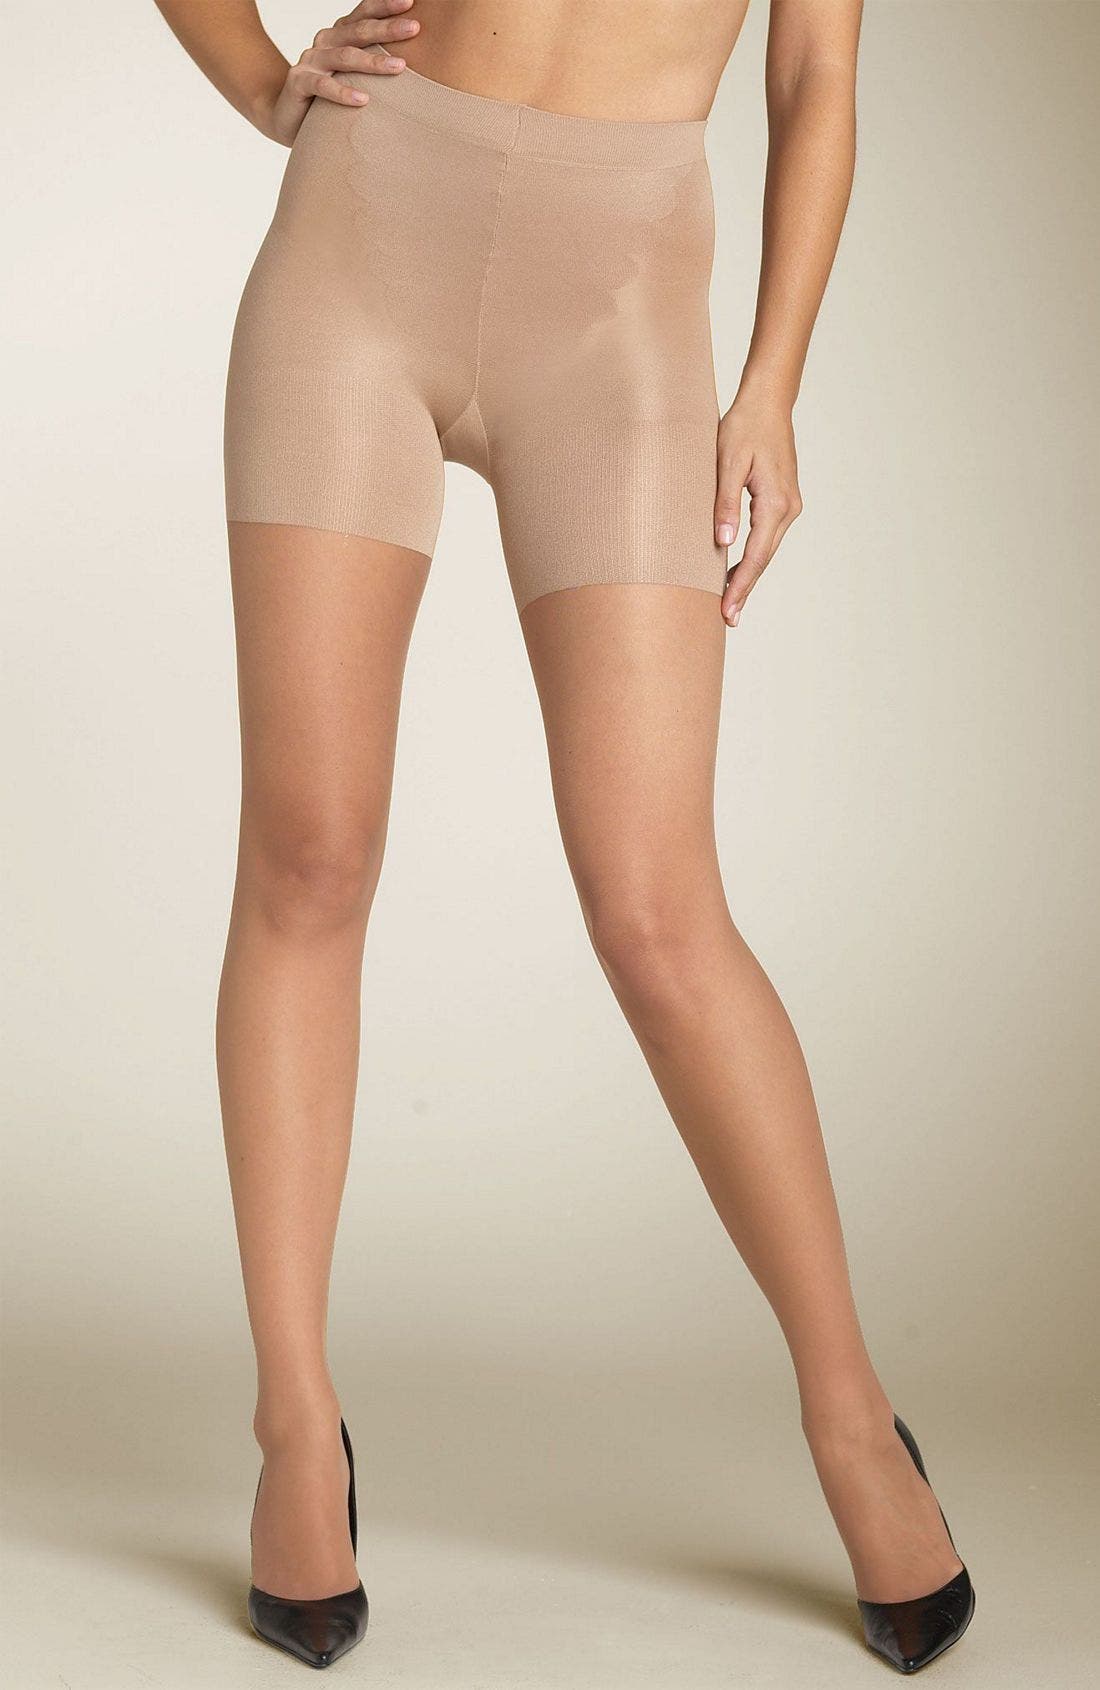 Spanx 'all The Way' Full Length Pantyhose With Super Control In